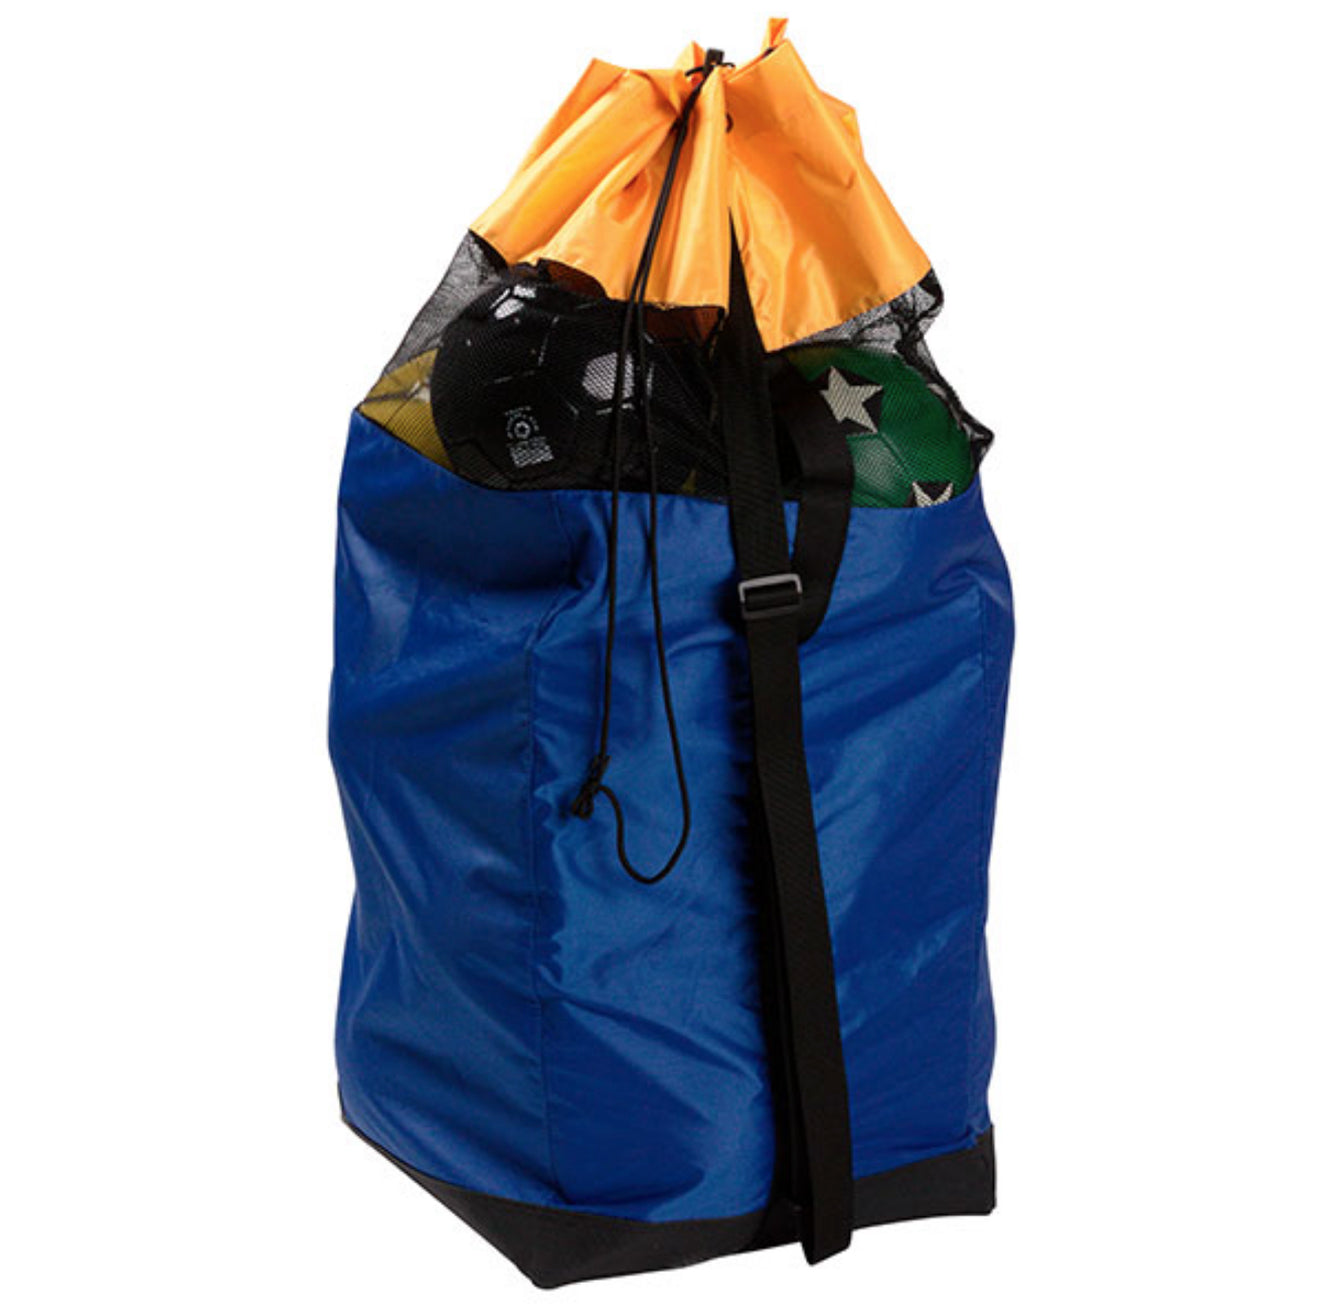 Multi-Sport Duffel Bag - Youth Sports Products